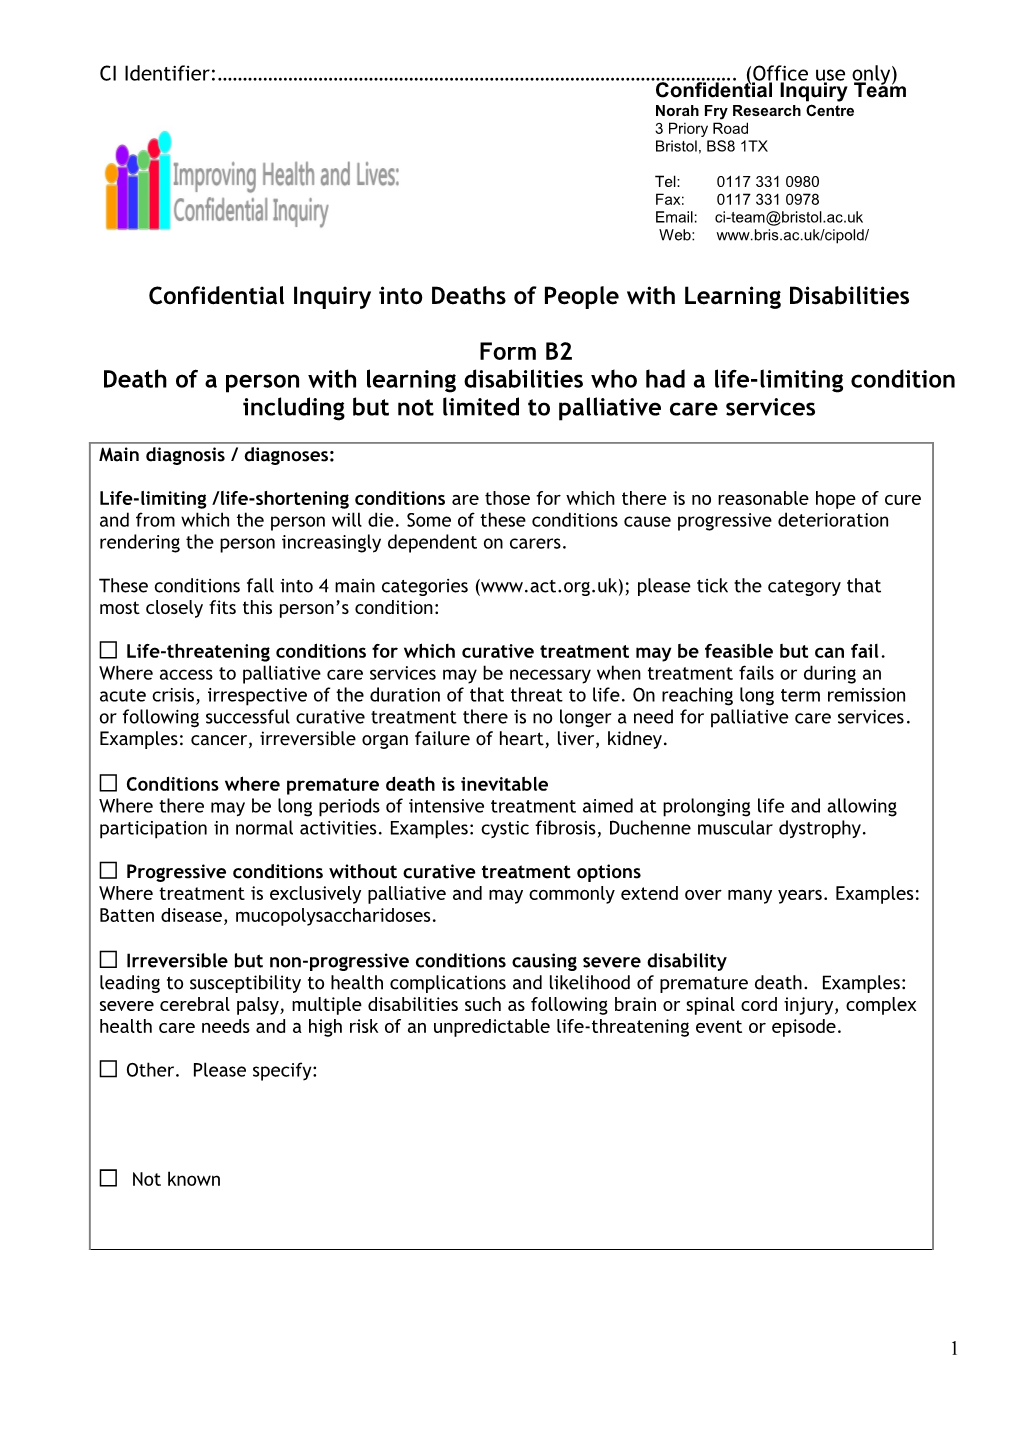 Confidential Inquiry Into Deaths Ofpeople with Learning Disabilities